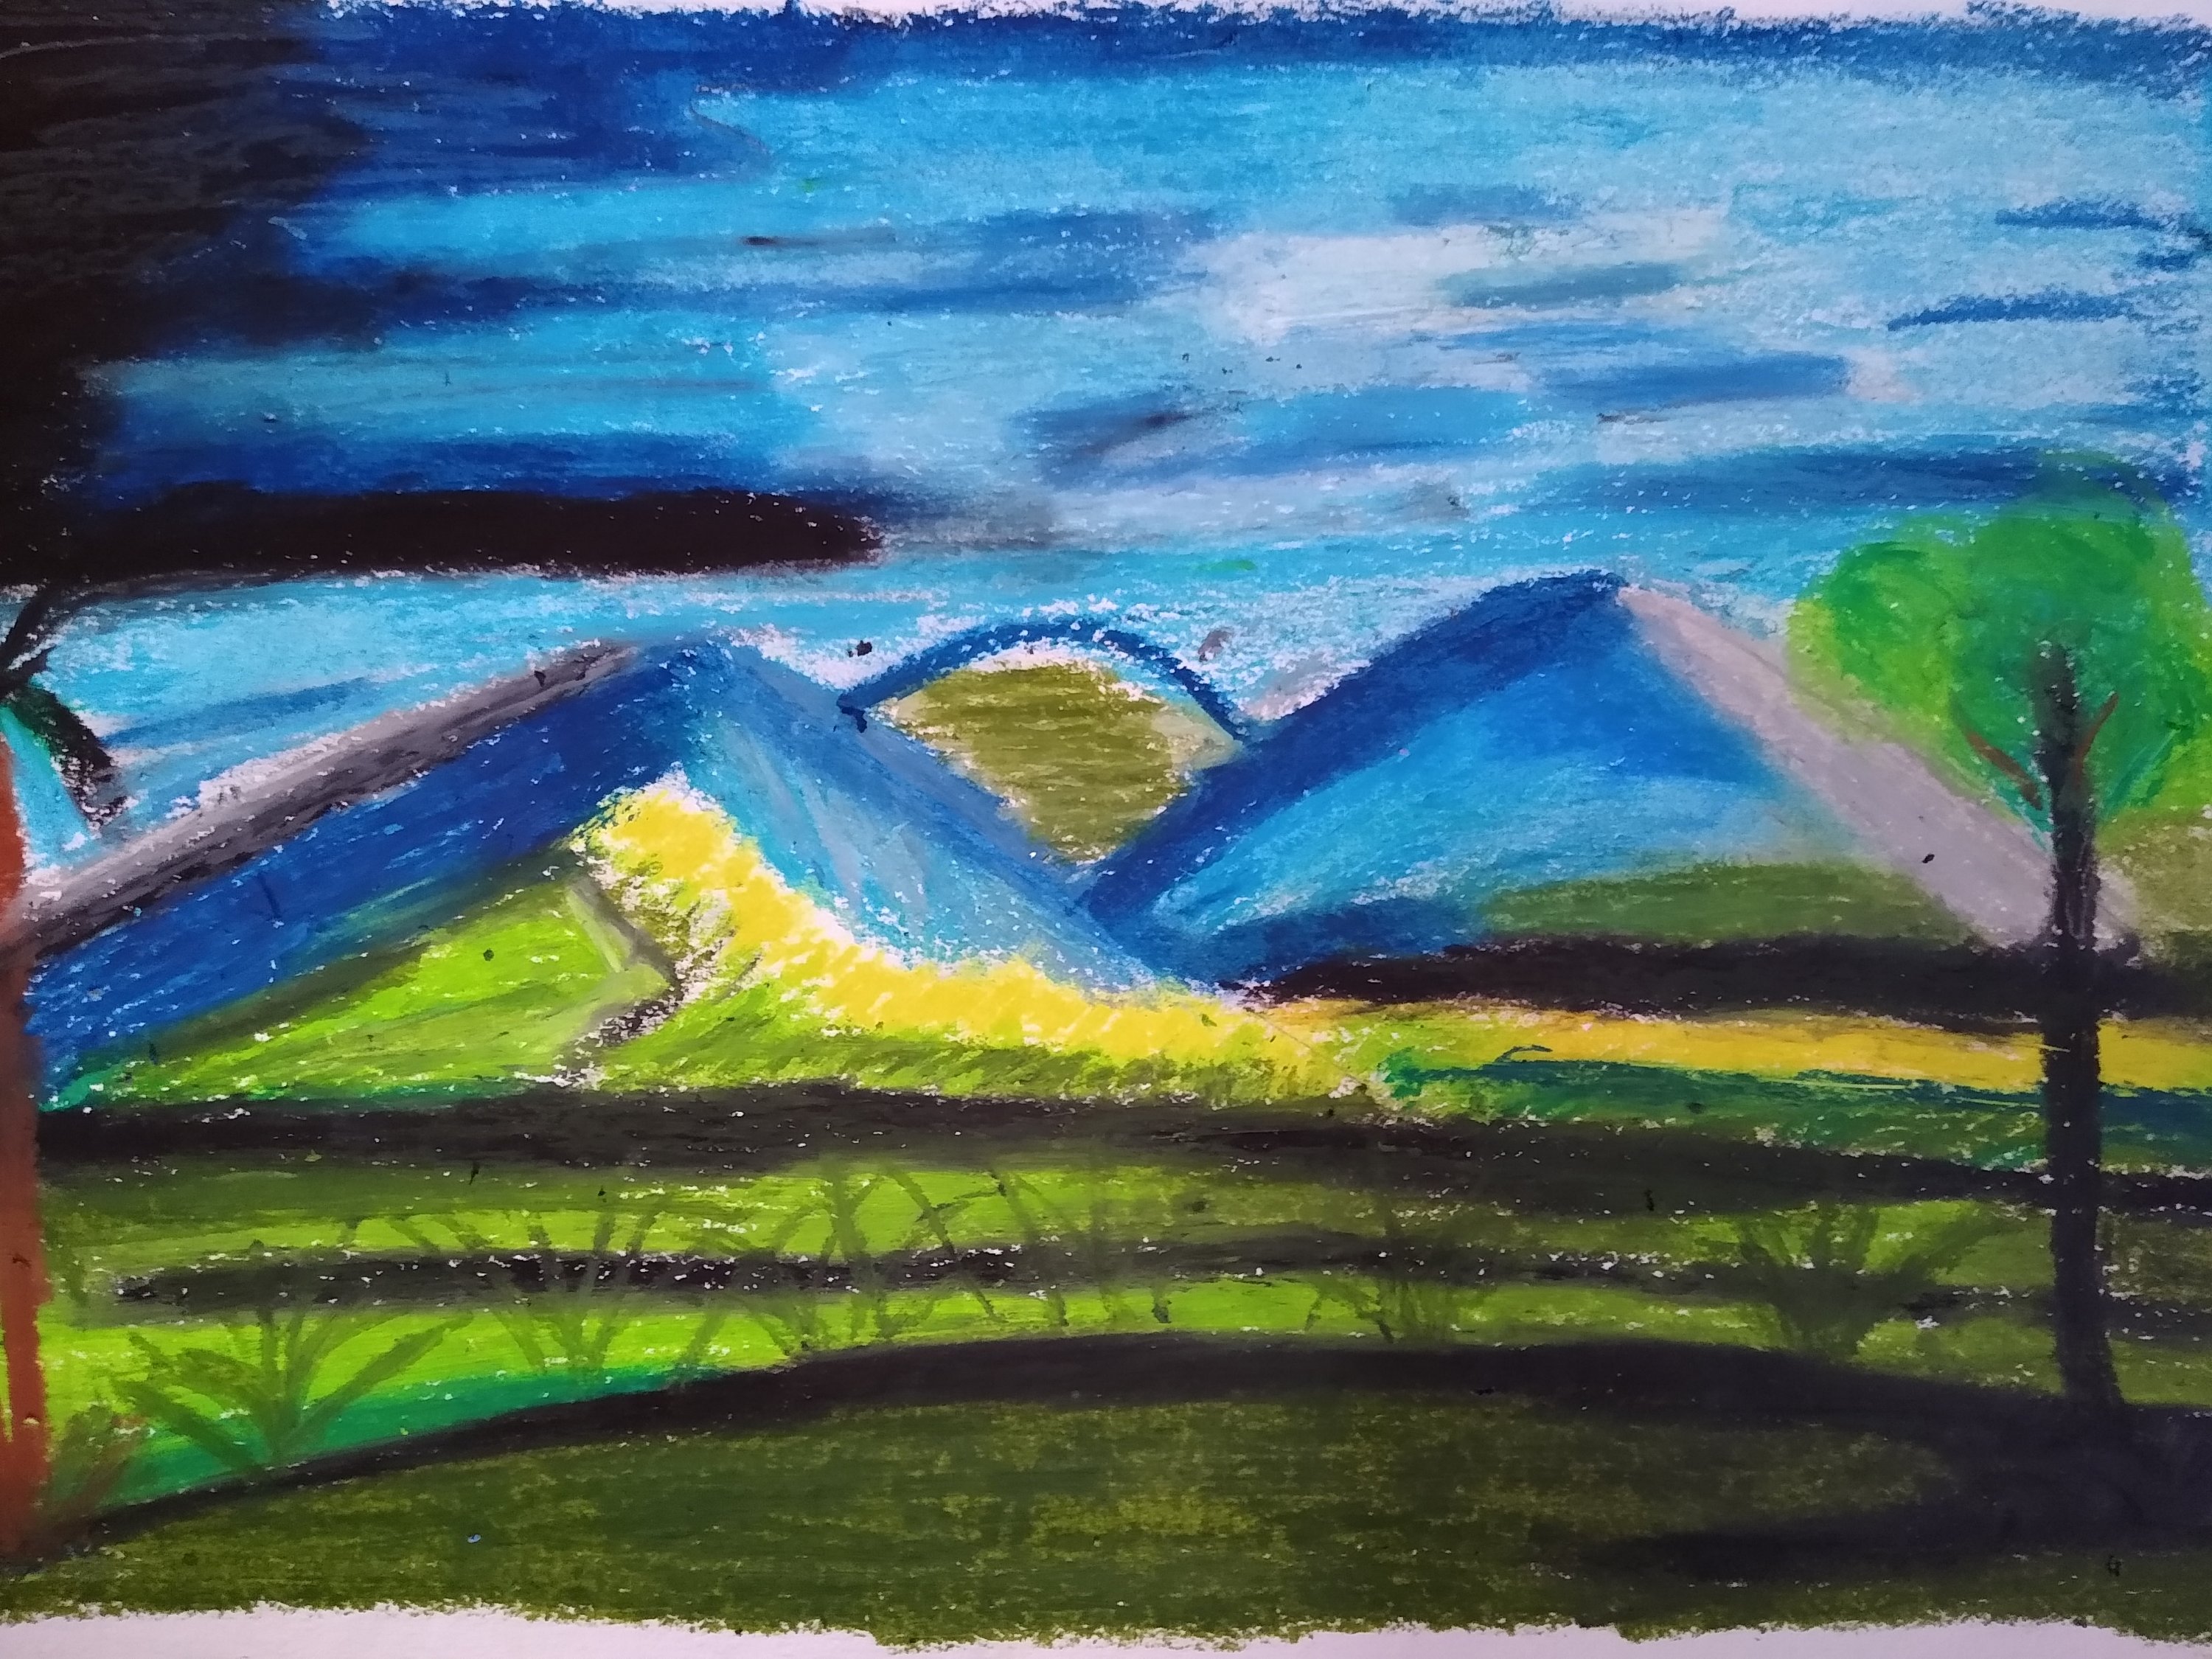 Oil Pastel Drawing Ideas My Pen Meets Paper Best soft pastels drawings for beginners, best paper for soft pastels, books to help best soft pastels for beginners. my pen meets paper wordpress com